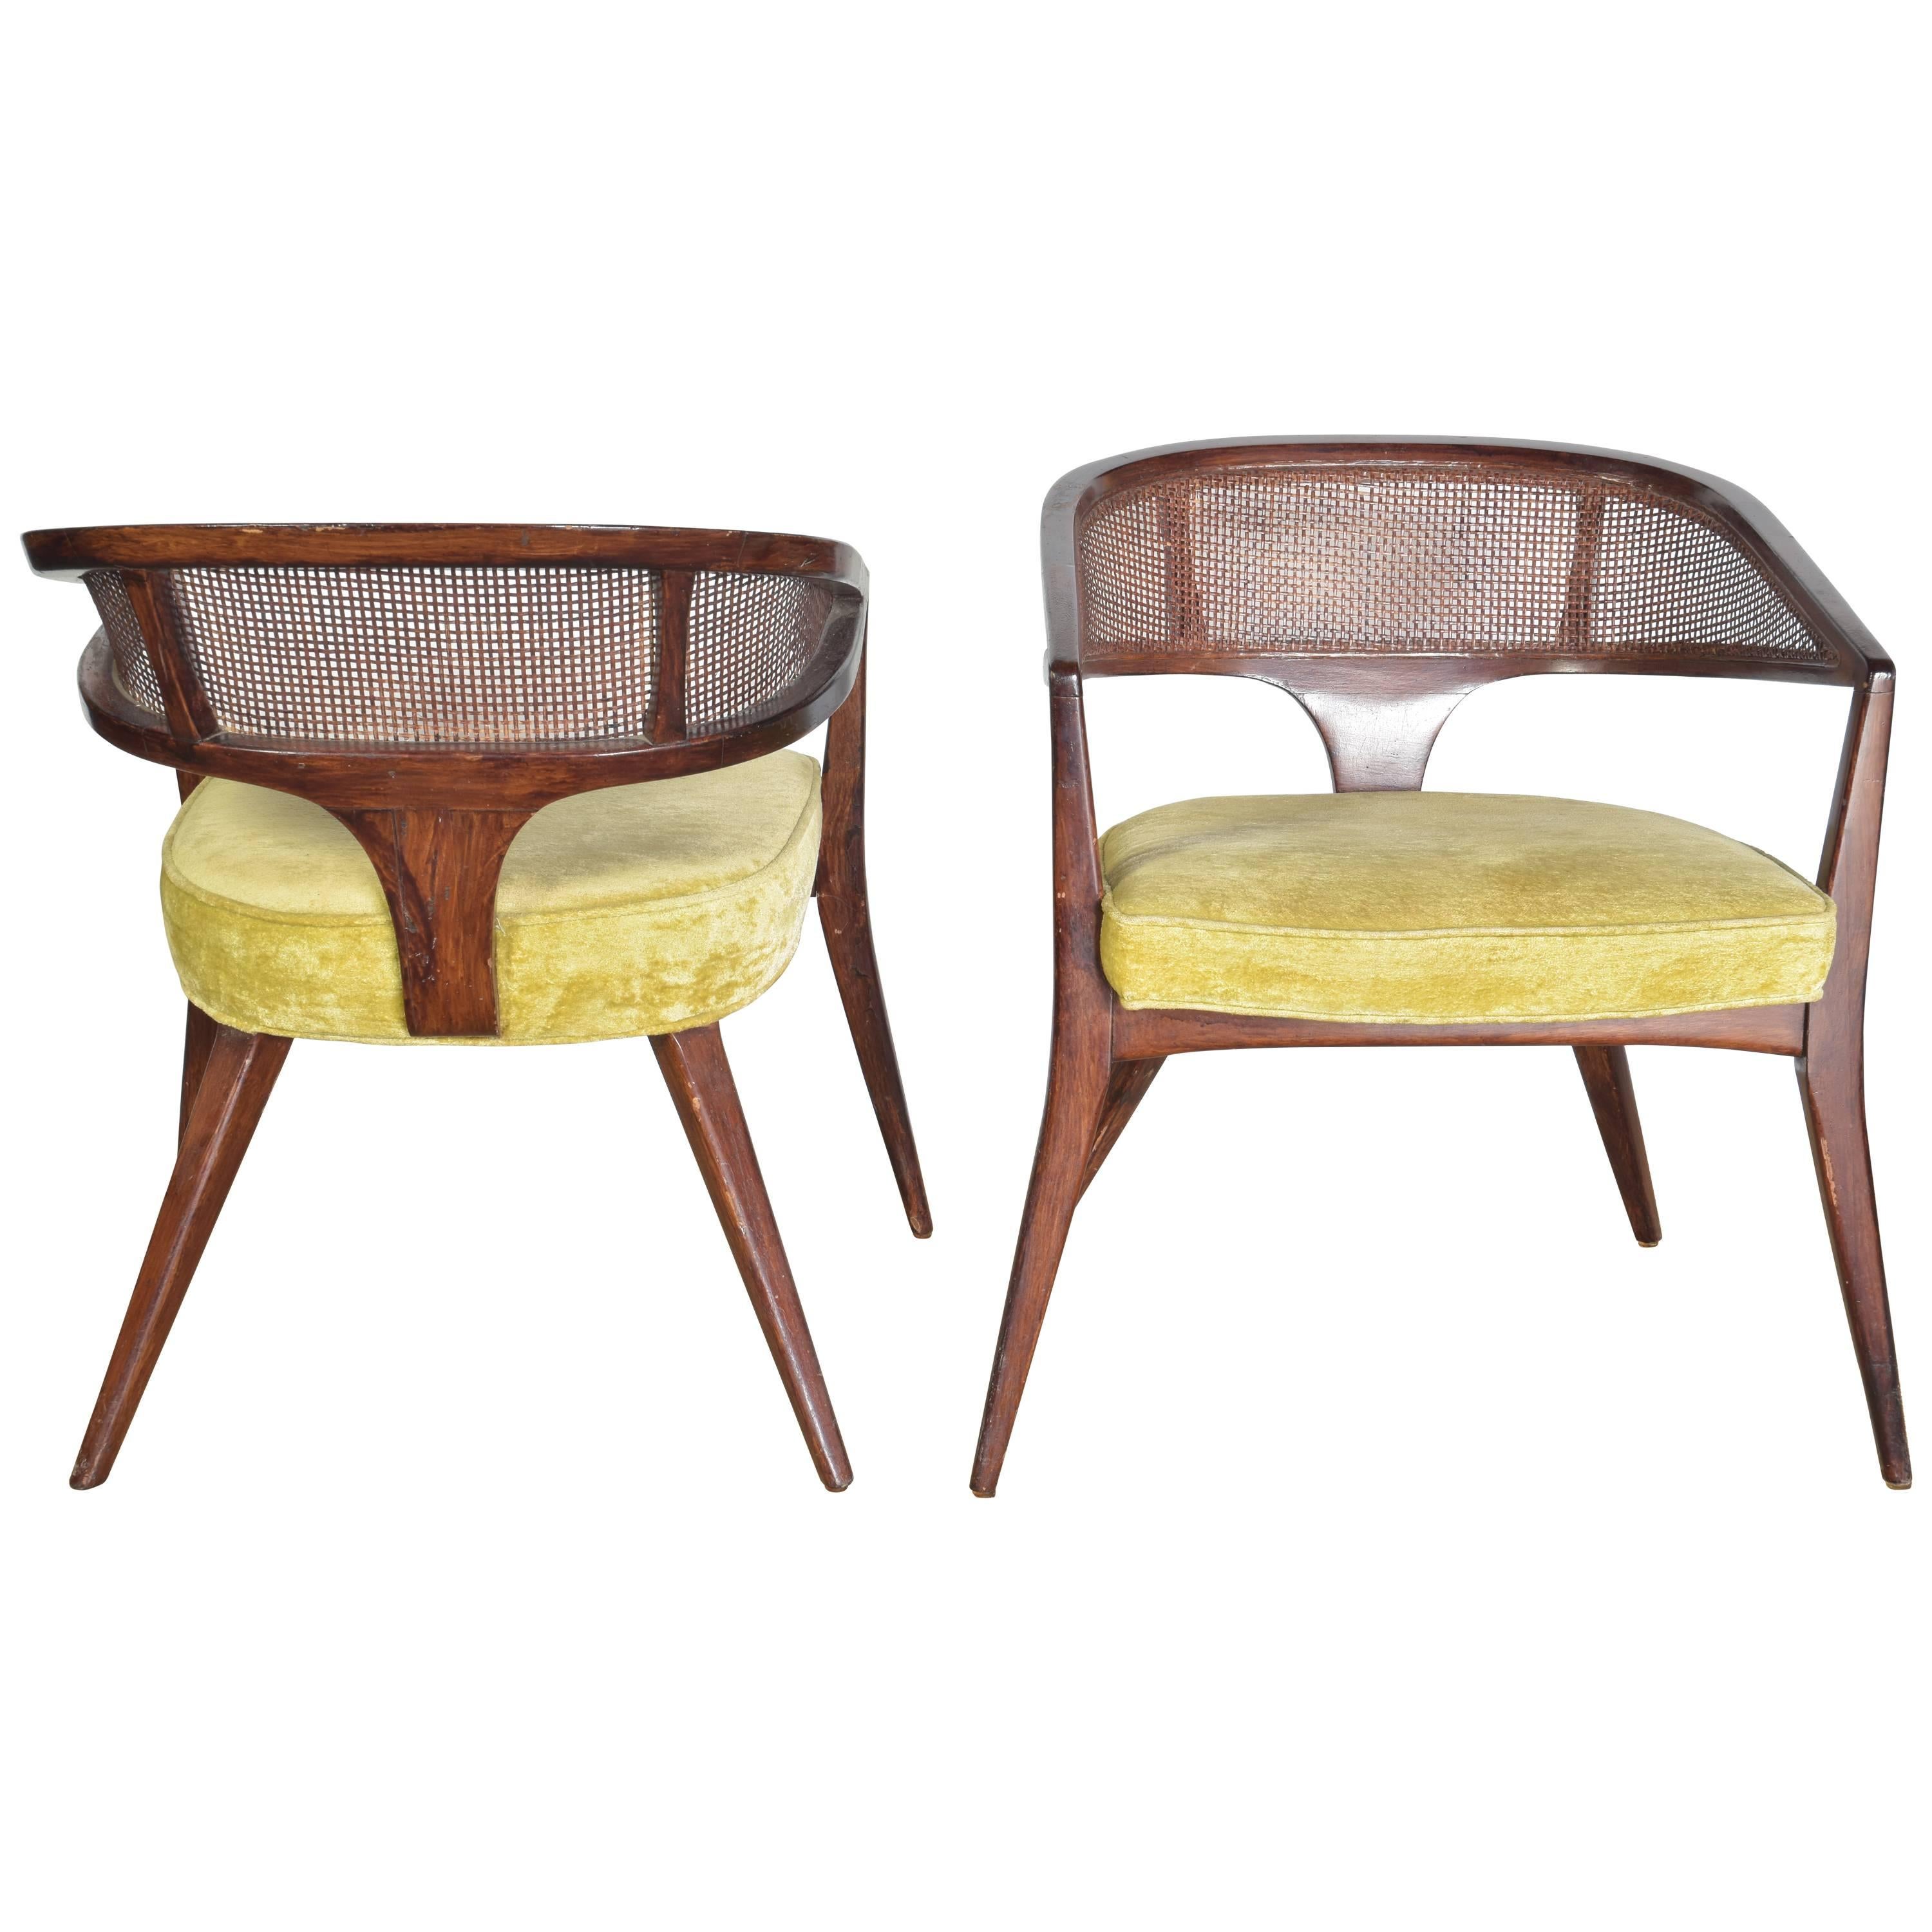 Pair of Midcentury Curved Back Chairs